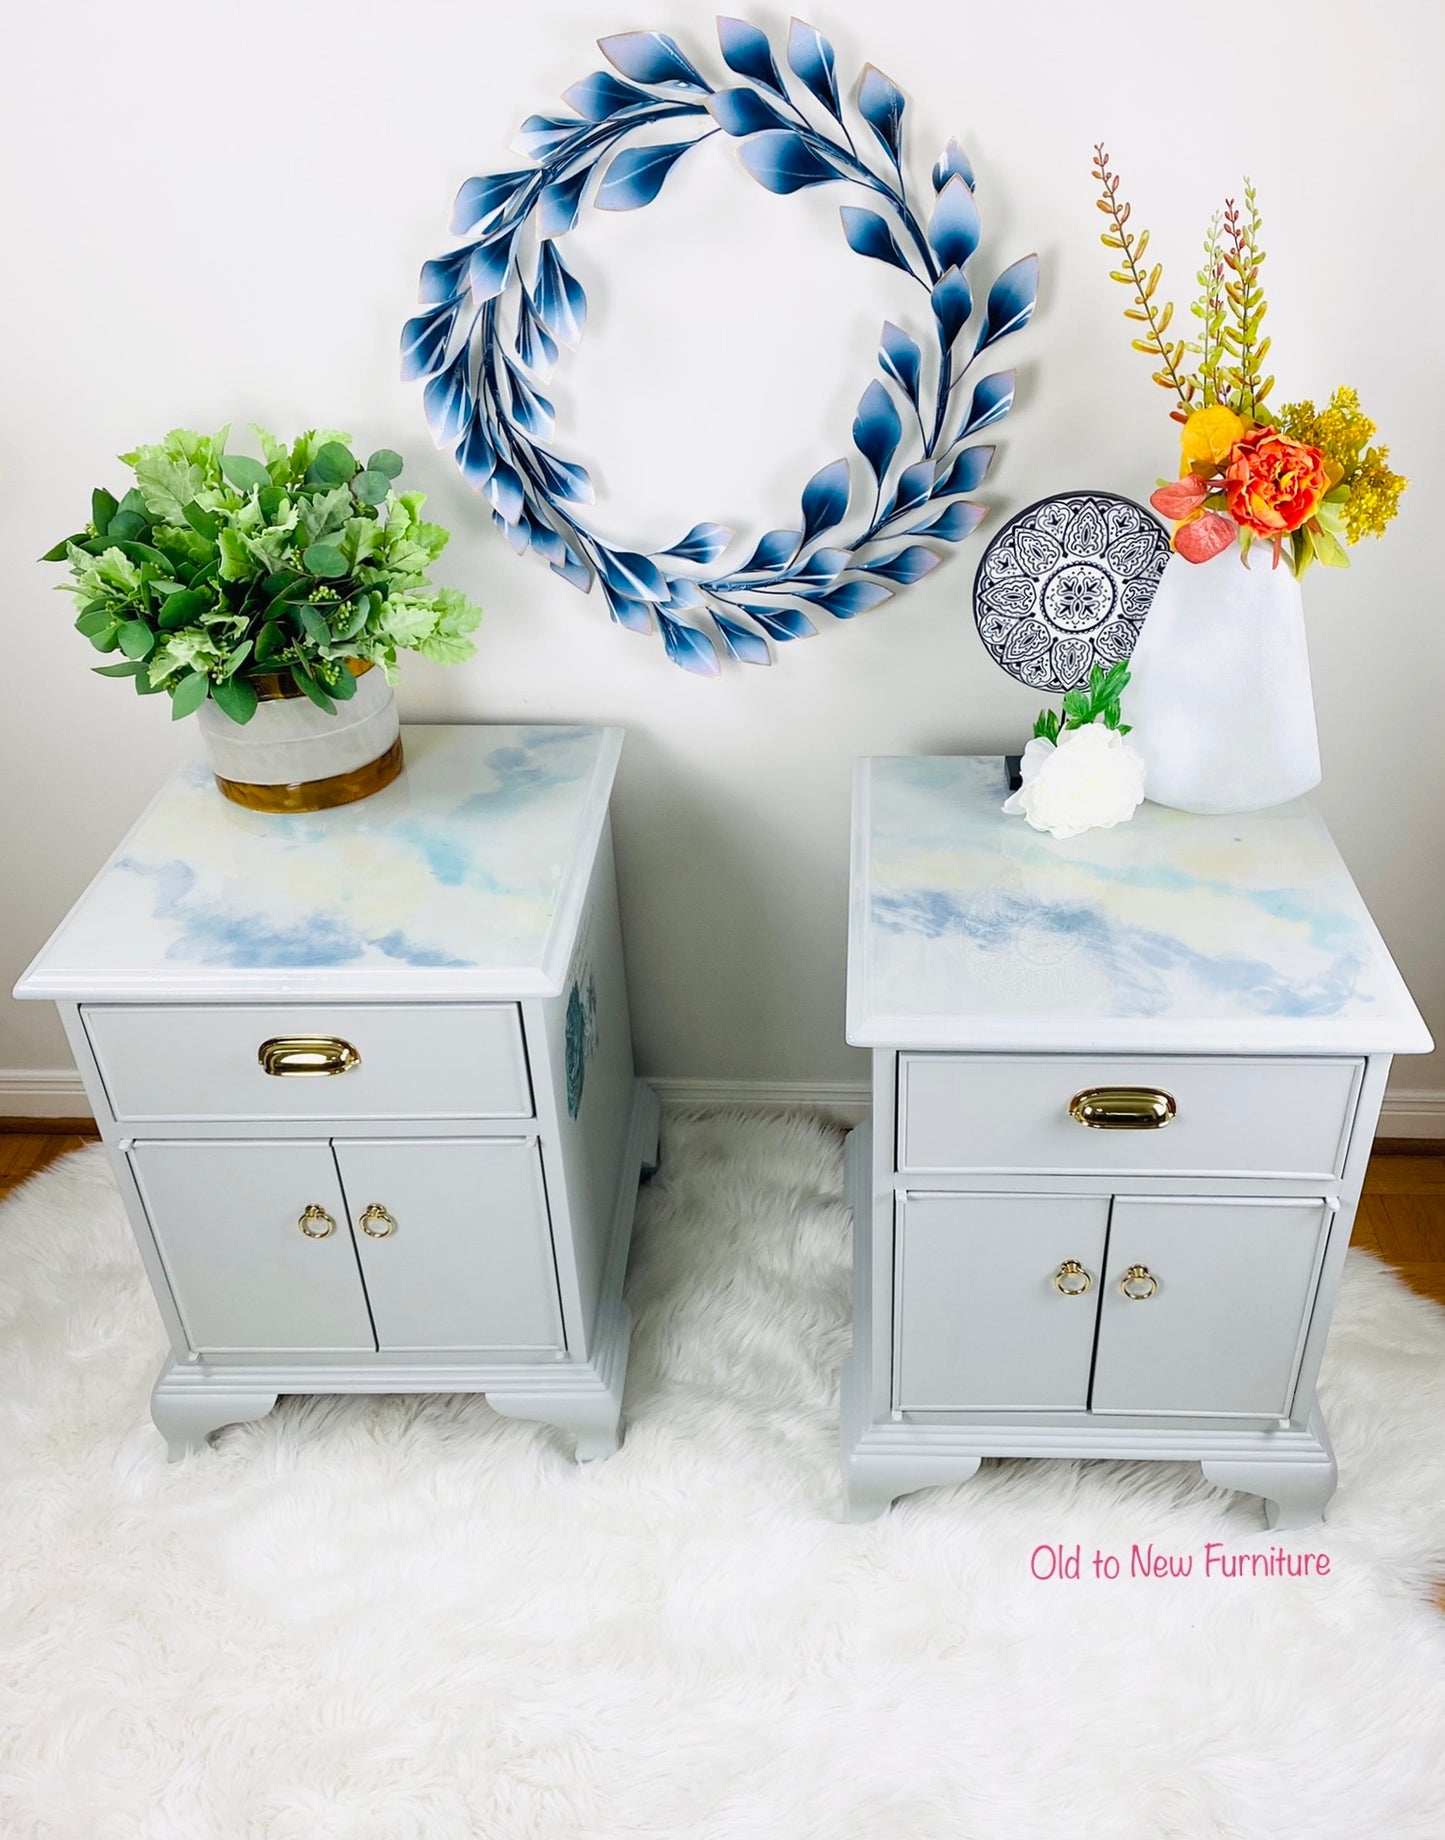 Glamorous Contemporary End Tables With A Marbled Finish Epoxy Top